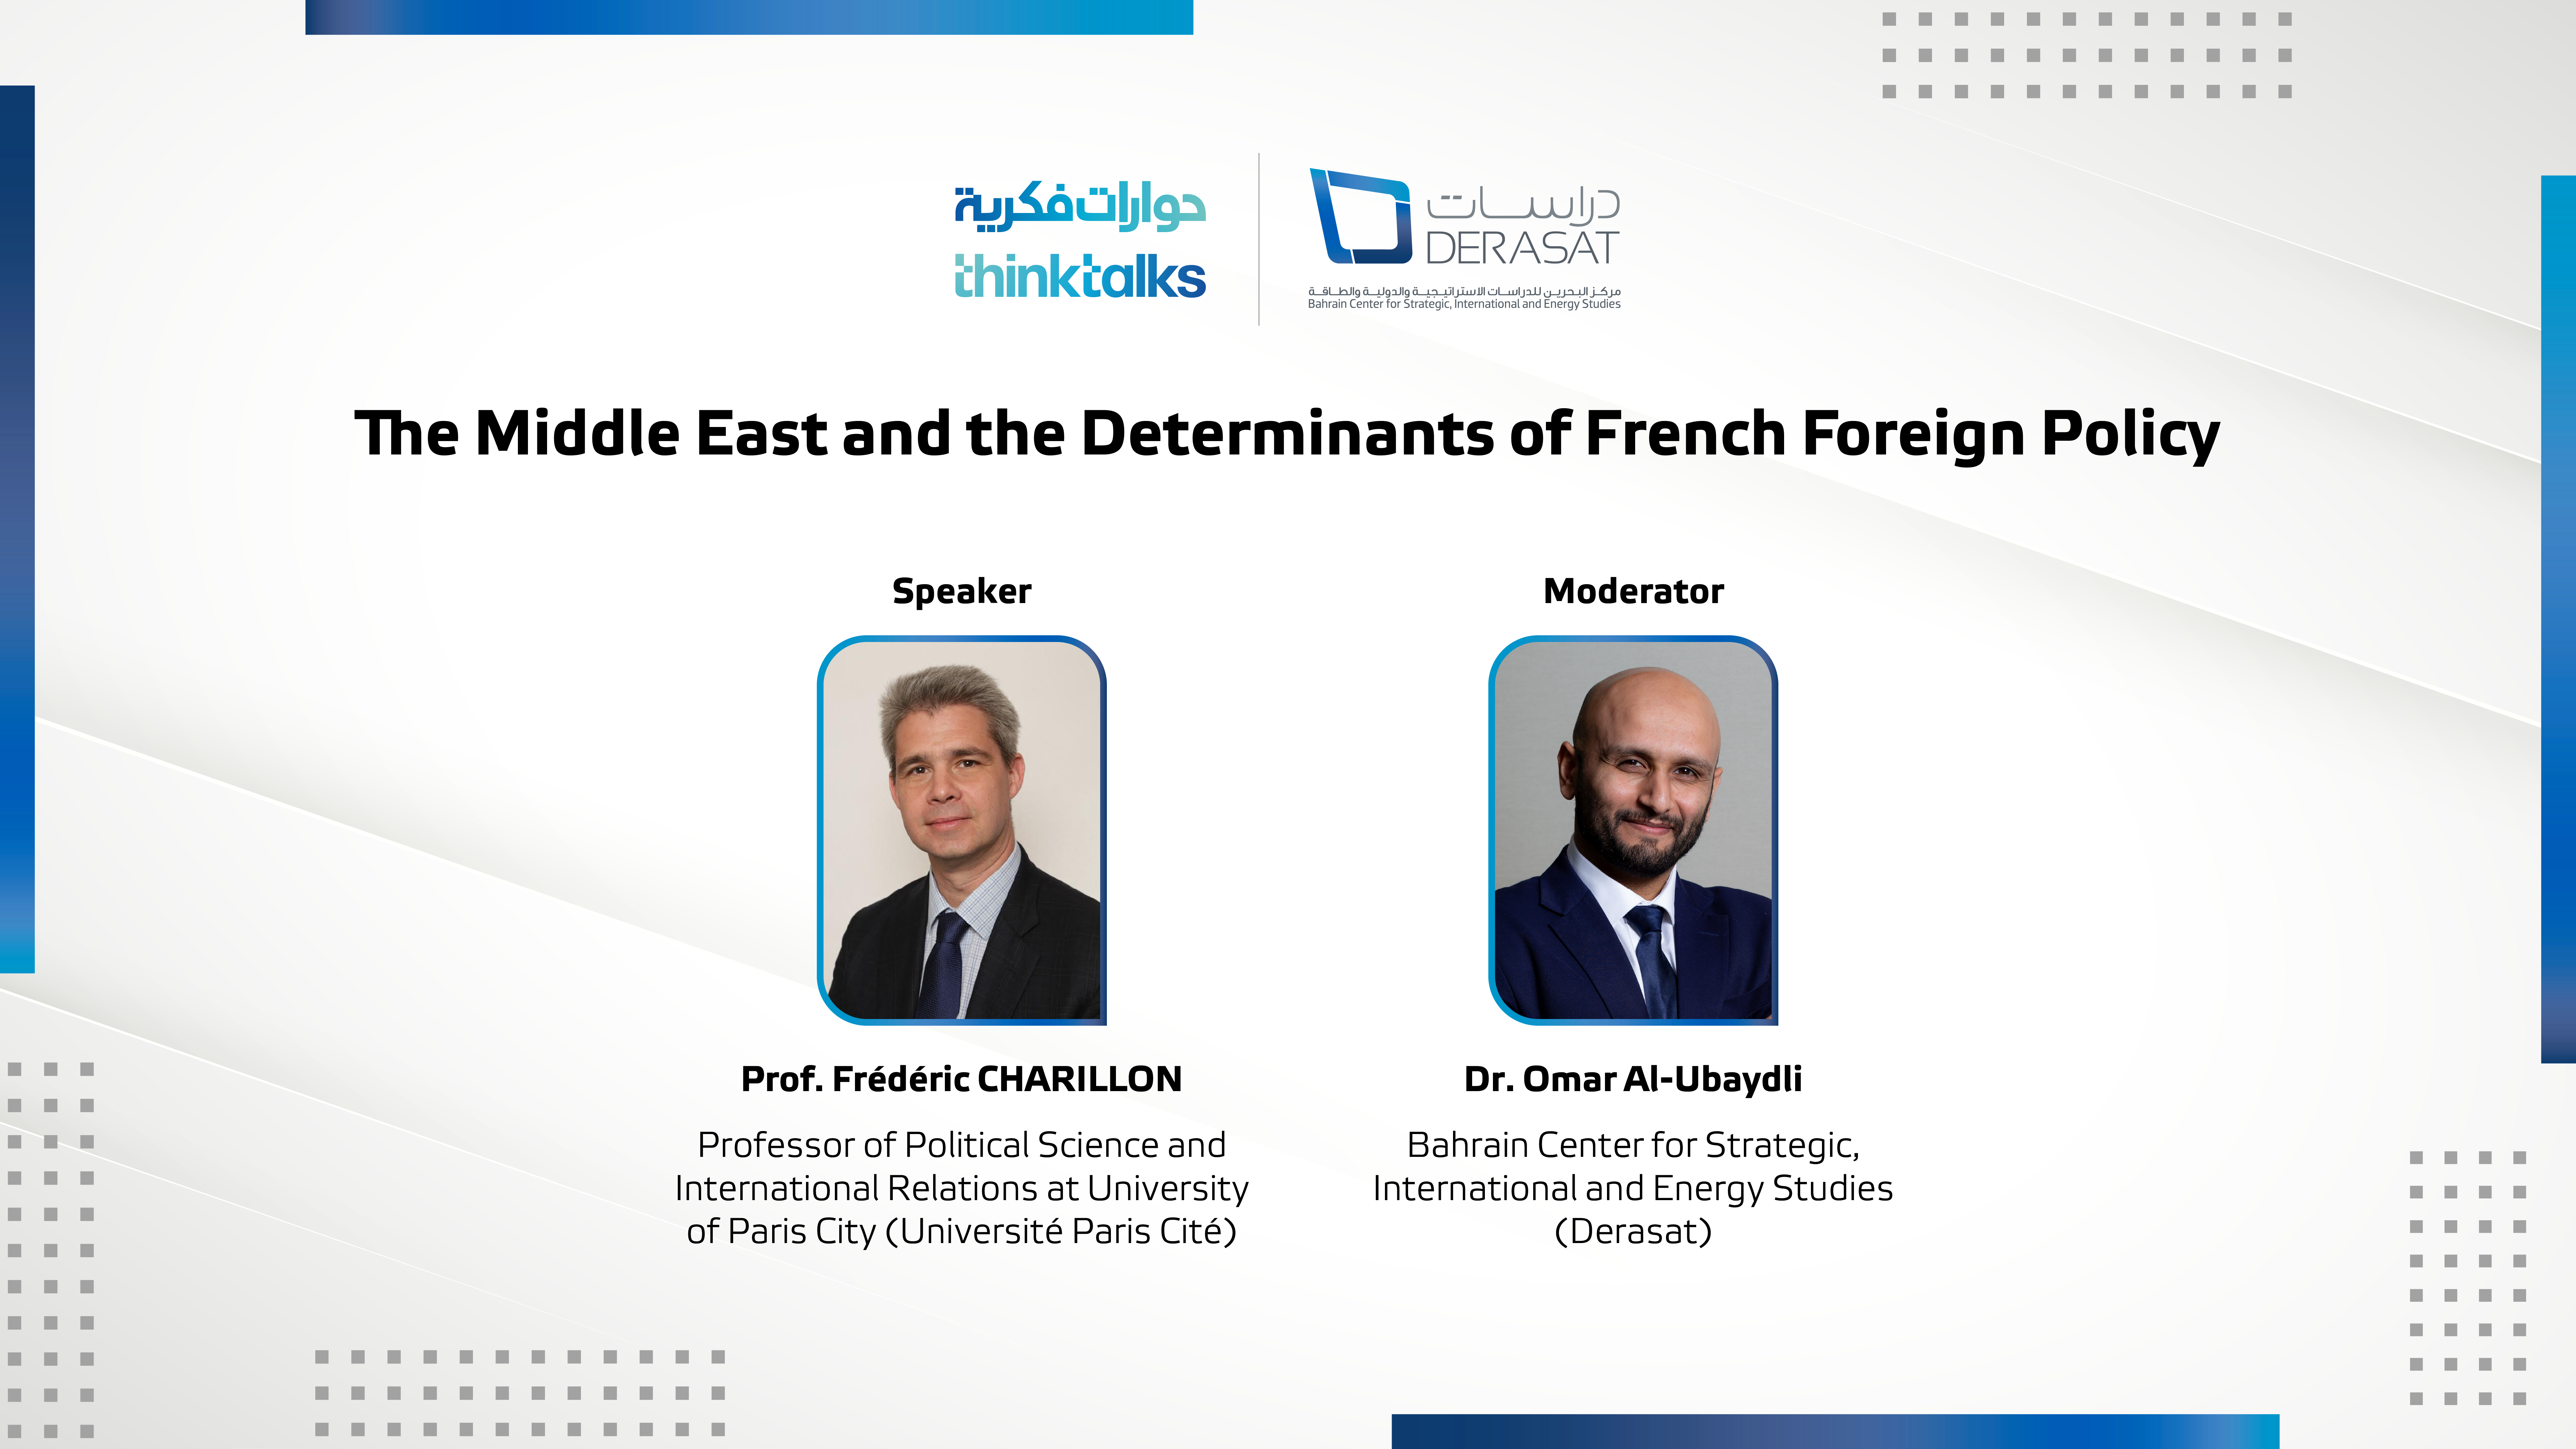 The Middle East and the Determinants of French Foreign Policy